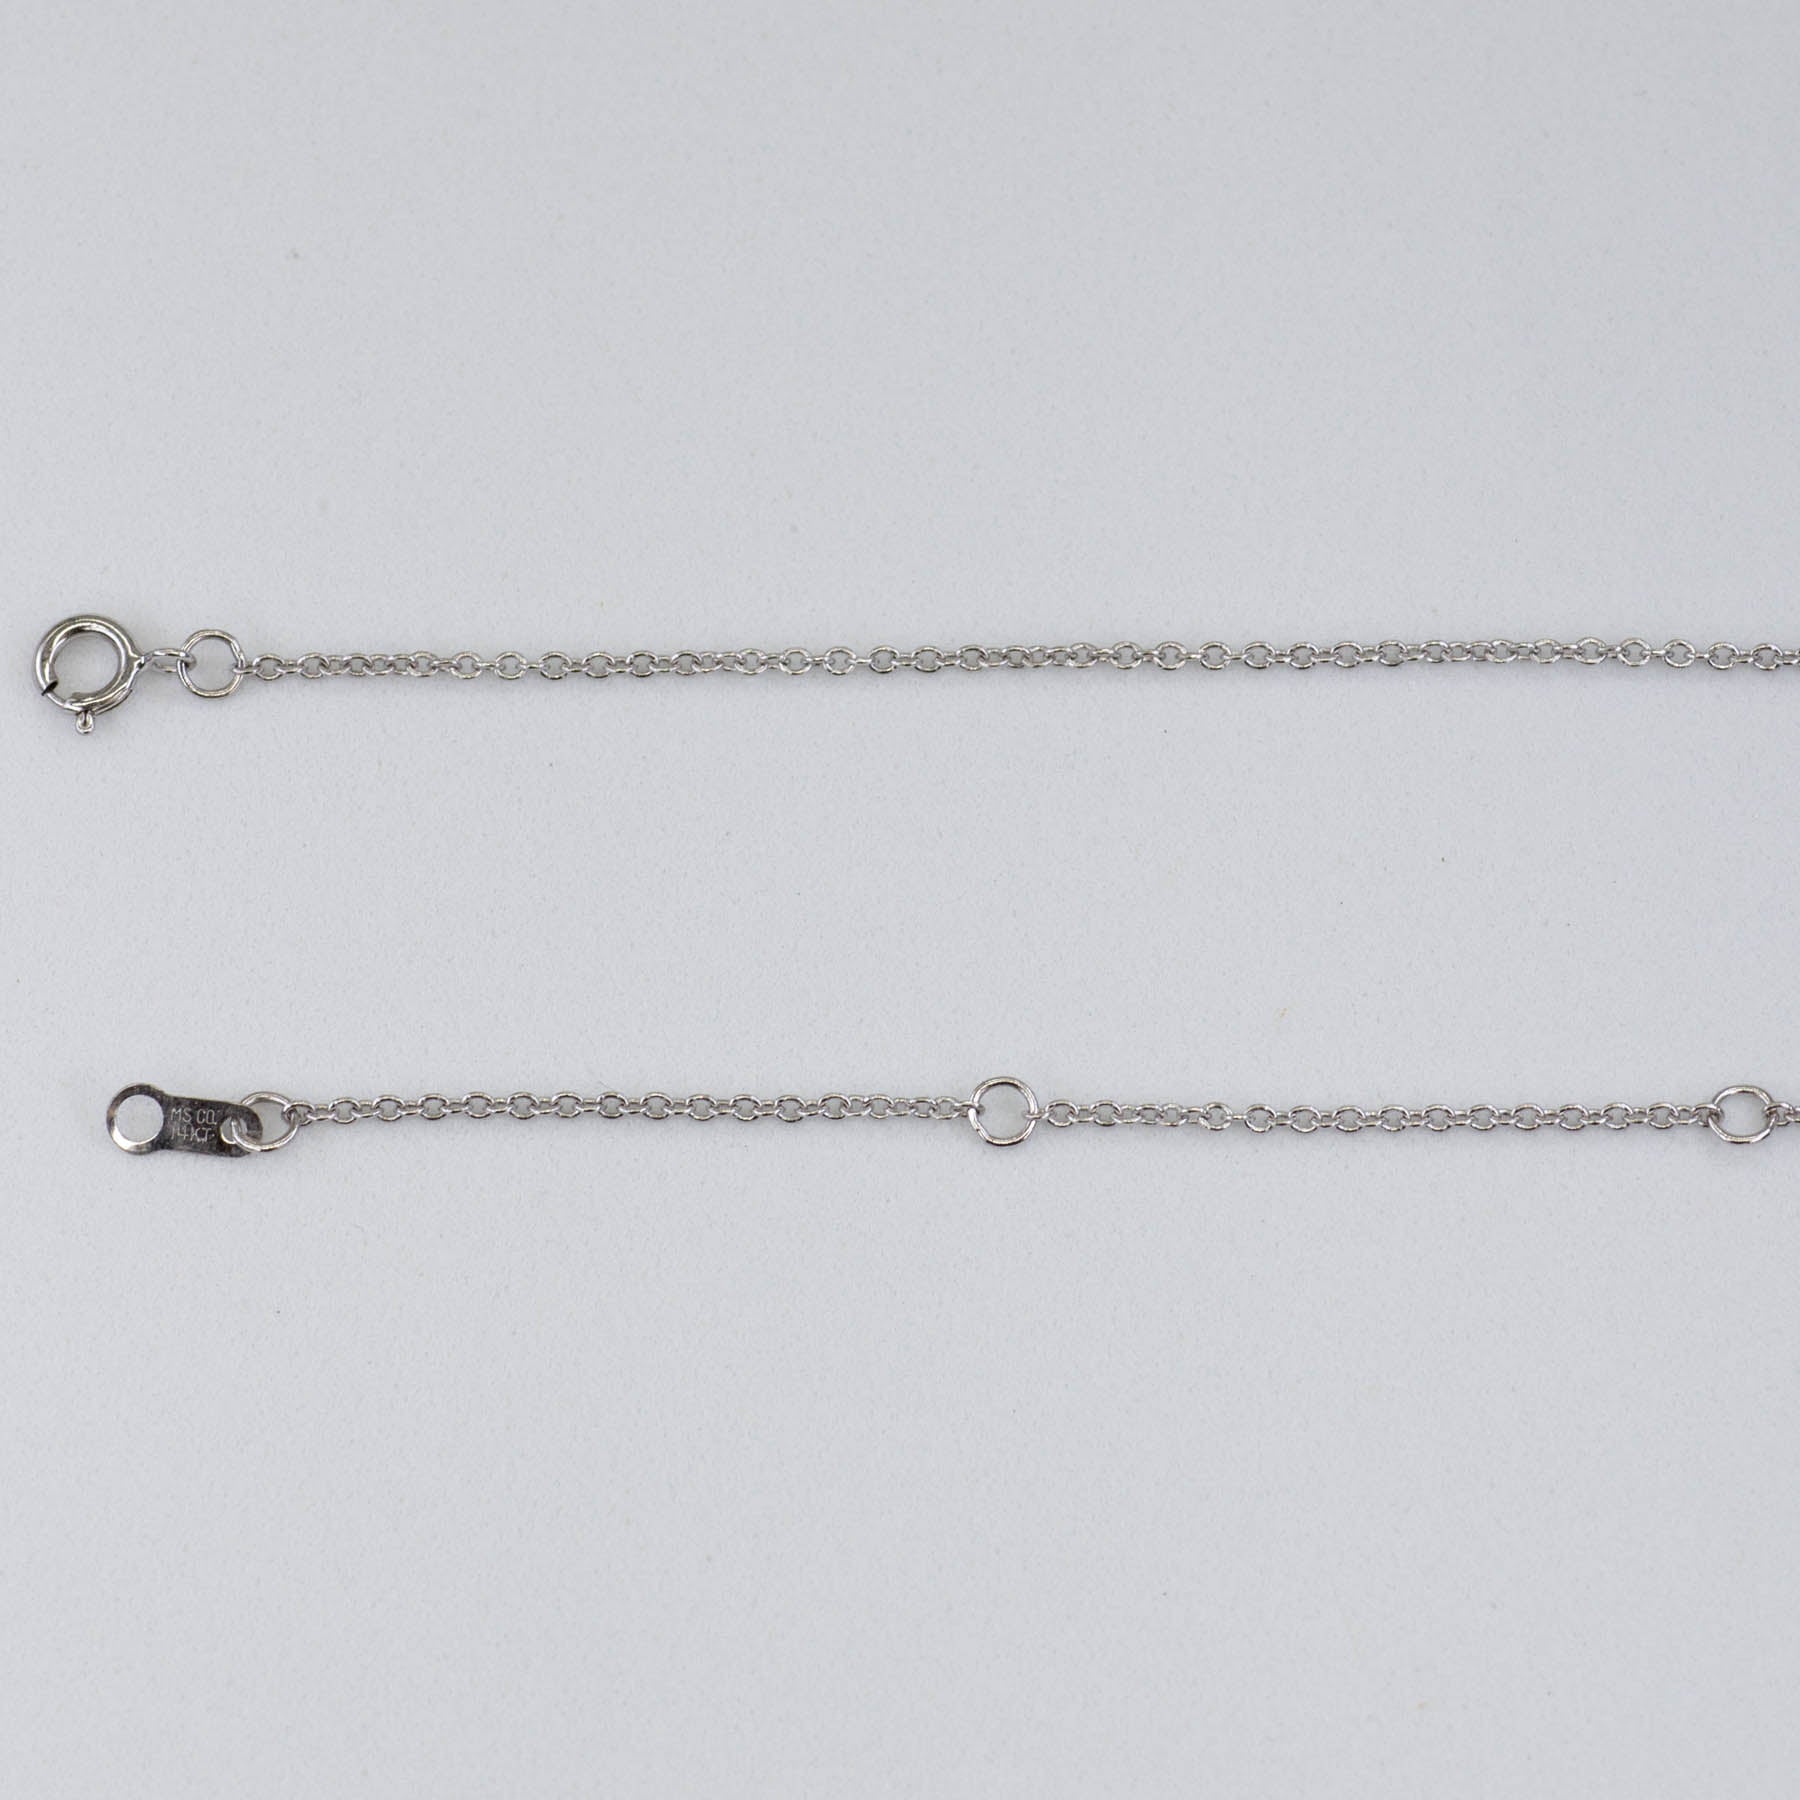 '100 Ways' Infinity Necklace | Options Available | - 100 Ways